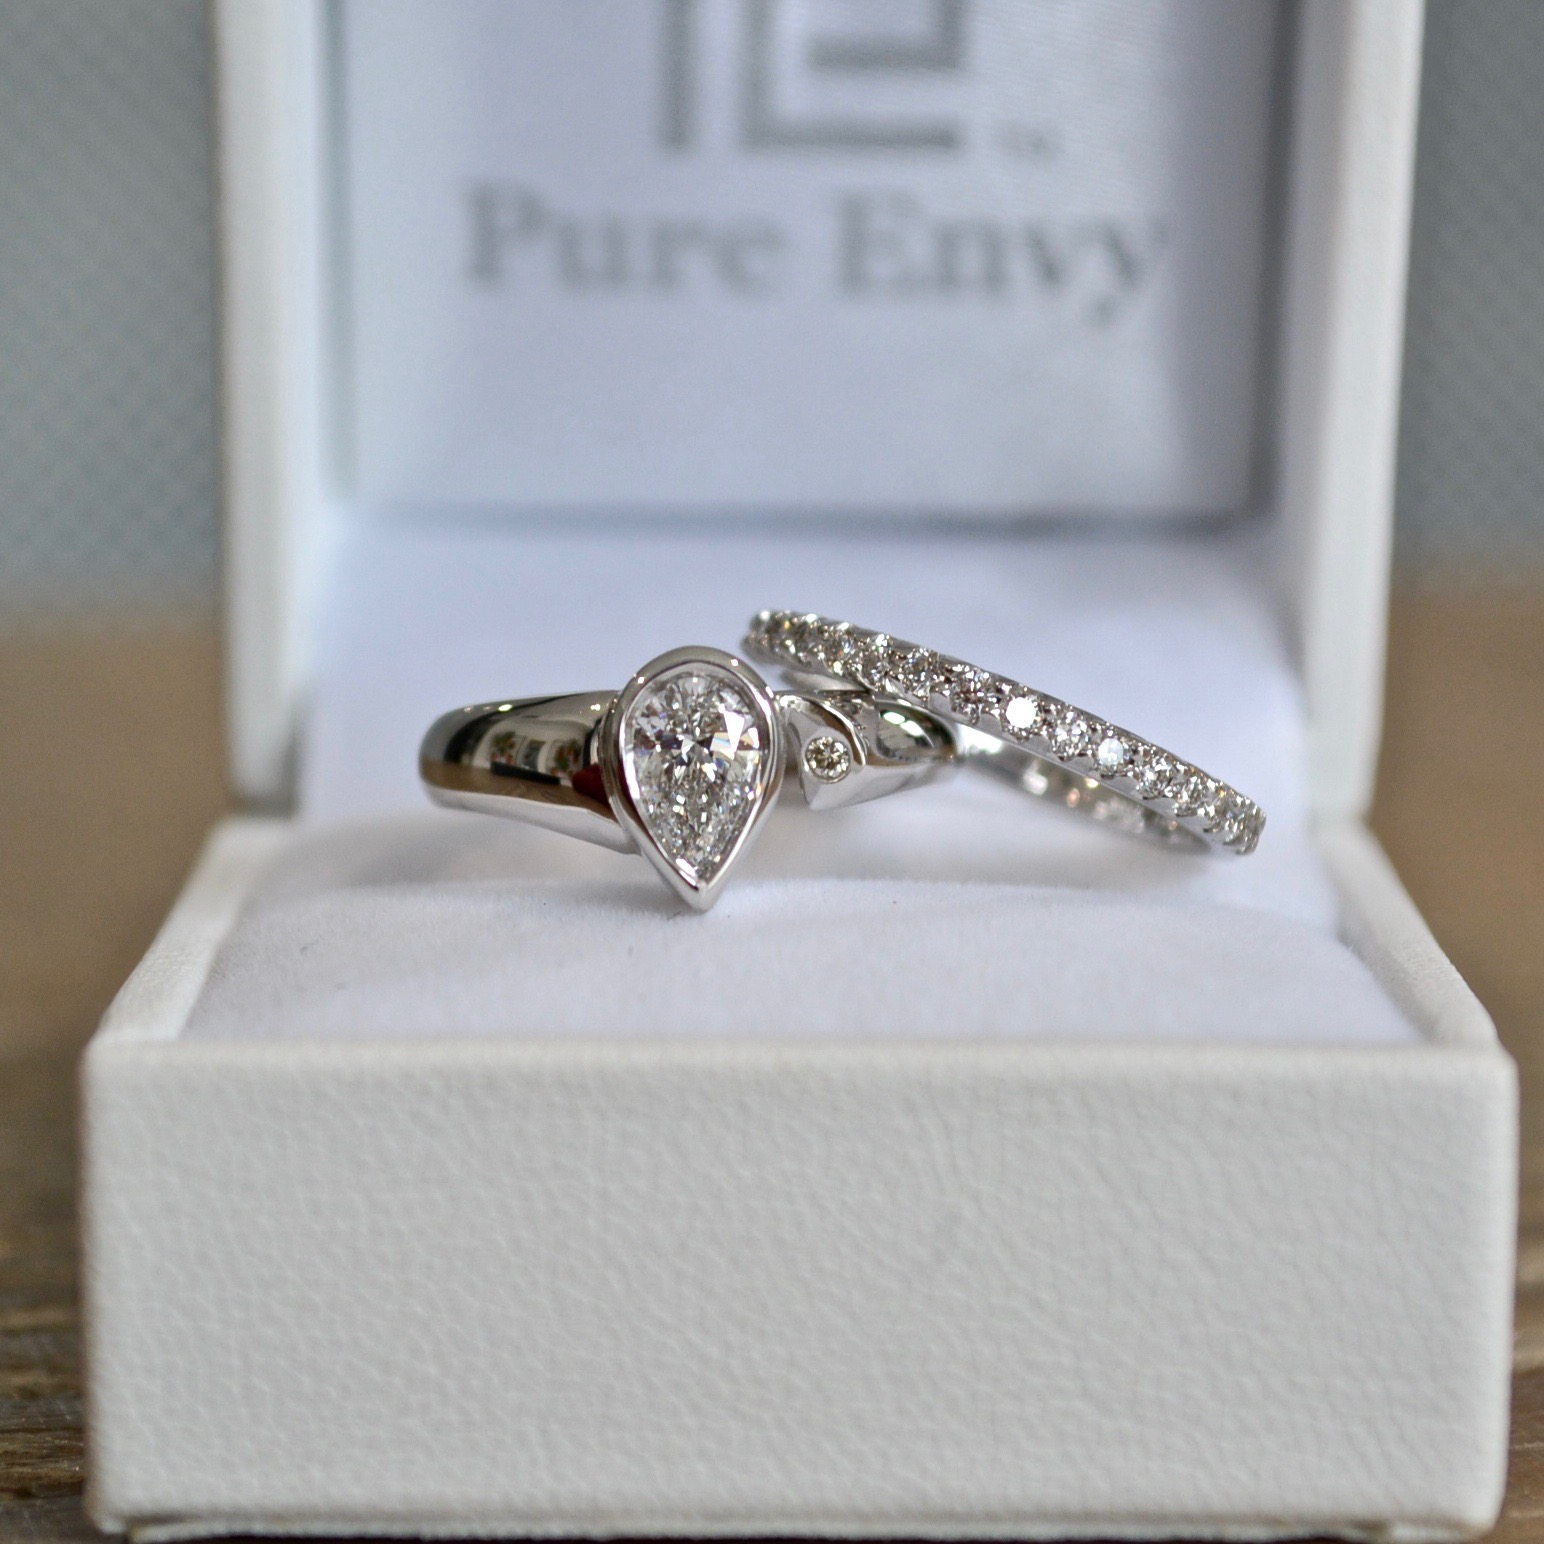 Pear shaped diamond solitaire